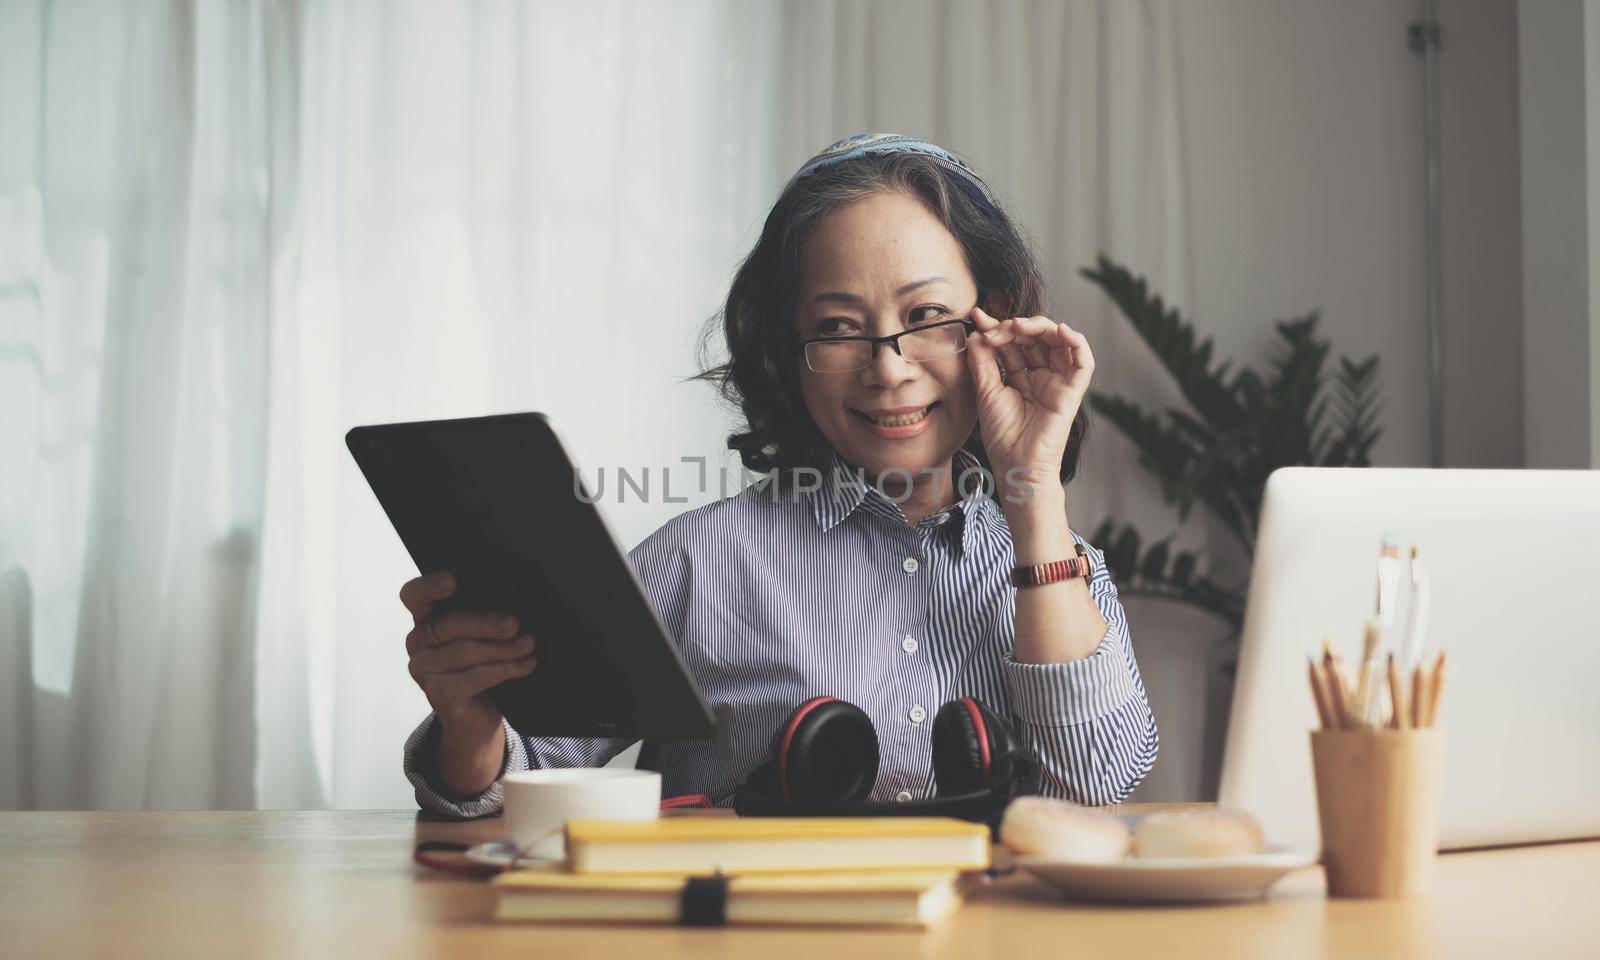 Middle age senior woman sitting at the table at home working using computer laptop with a happy face standing and smiling with a confident smile showing teeth.